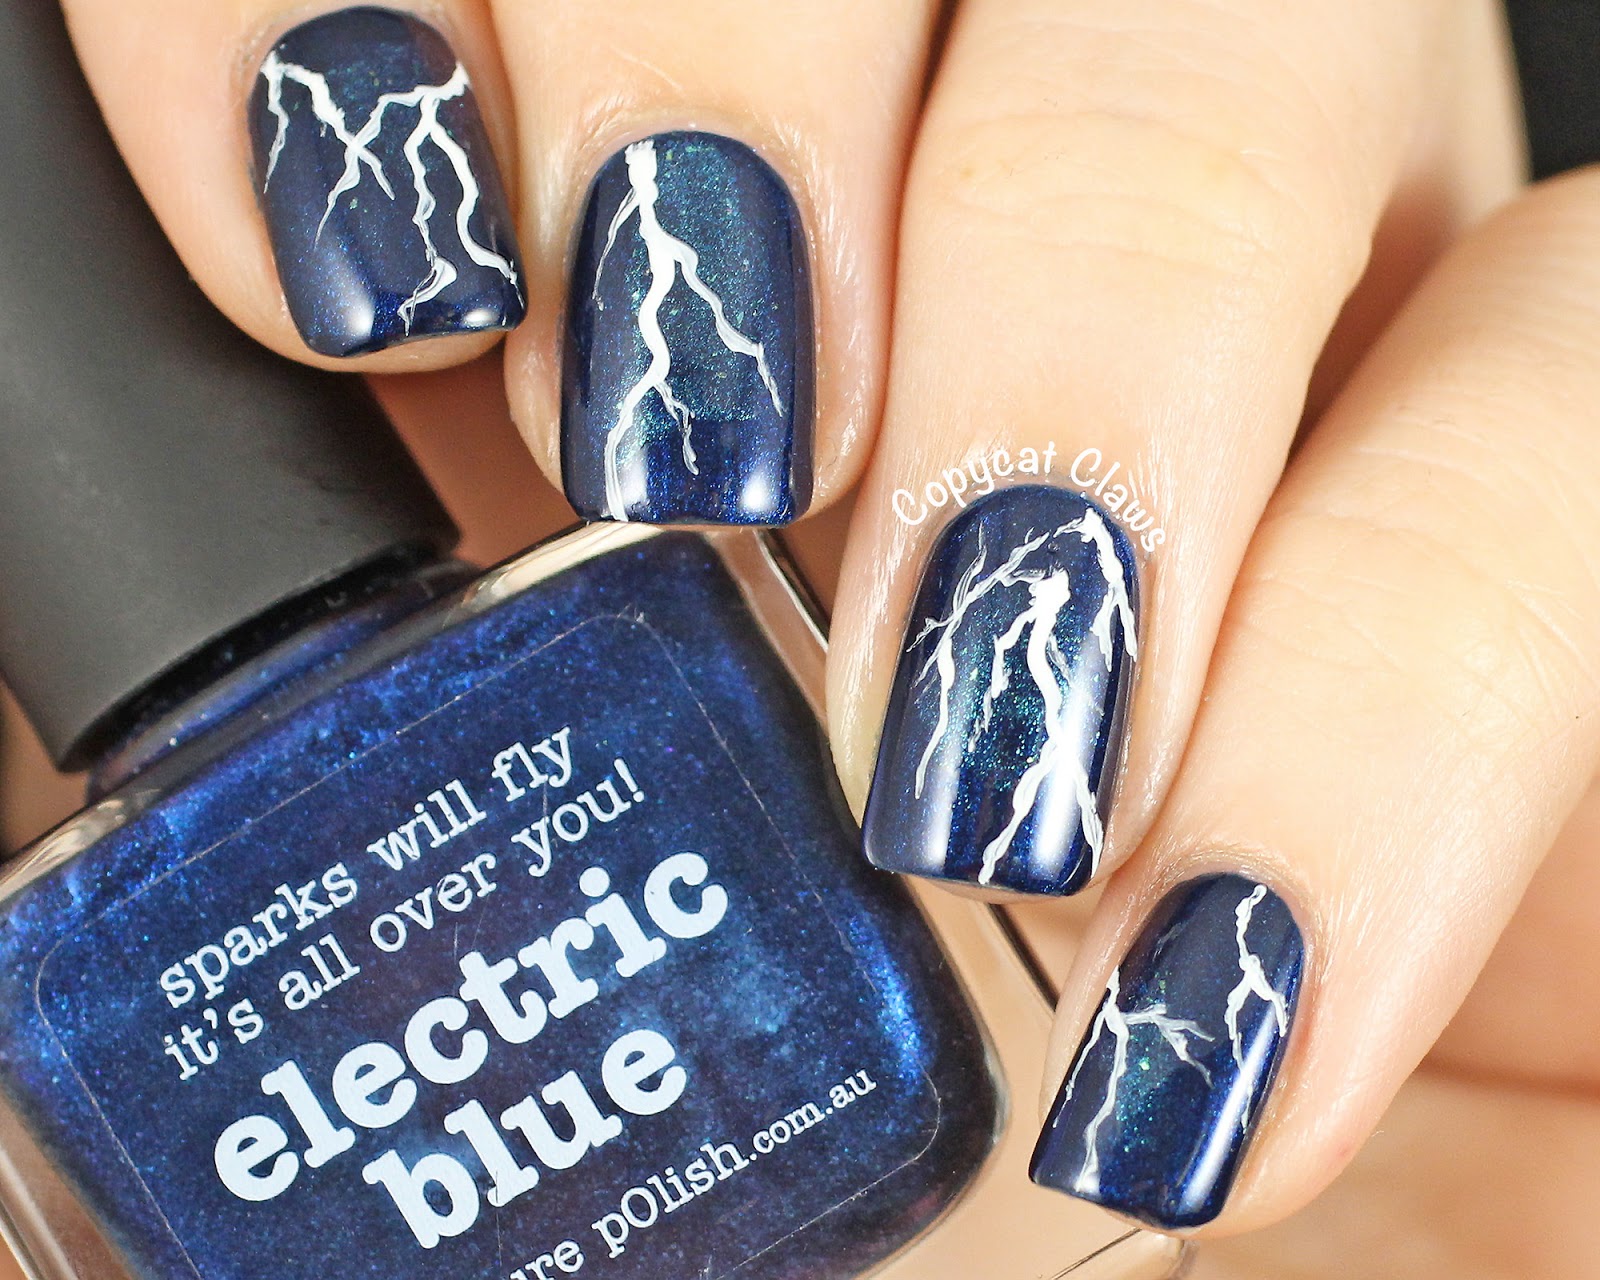 2. Electric Nail Art - wide 5